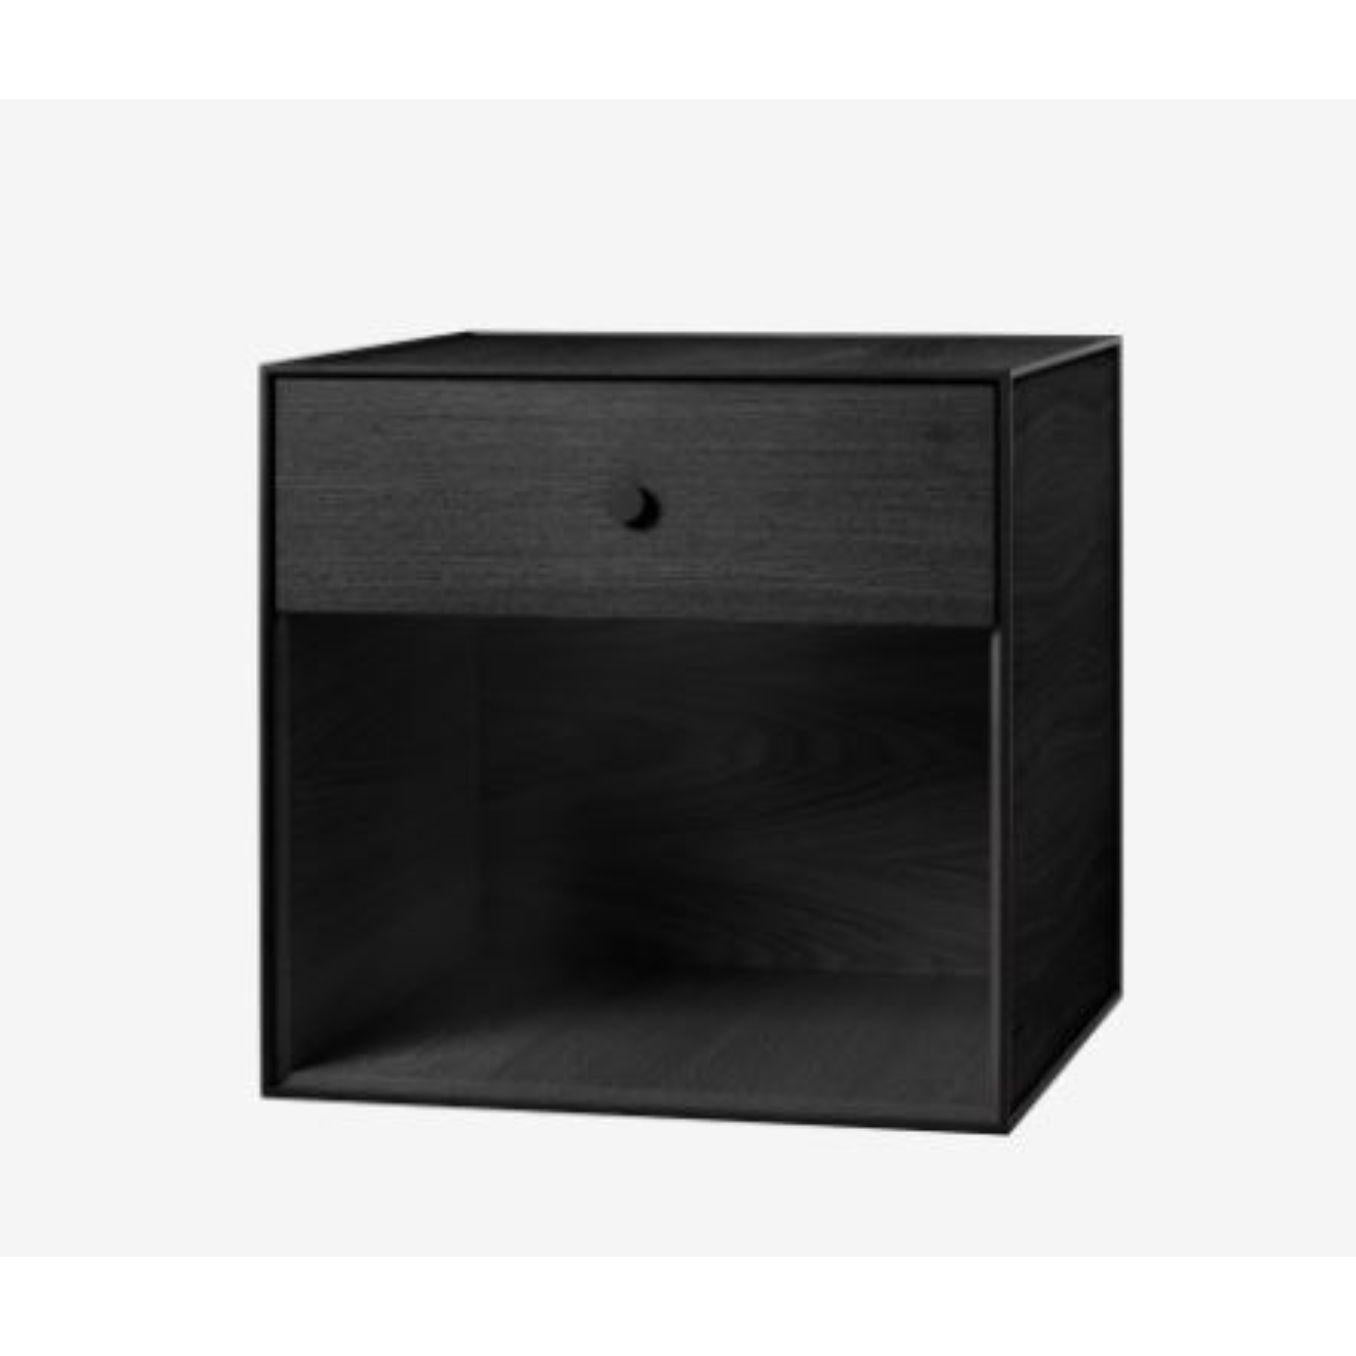 49 Black ash frame box with 1 drawer by Lassen
Dimensions: D 49 x W 42 x H 49 cm.
Materials: Finér, Melamin, Melamin, Melamine, Metal, Veneer, Ash
Also available in different colors and dimensions. 
Weight: 15 Kg


By Lassen is a Danish